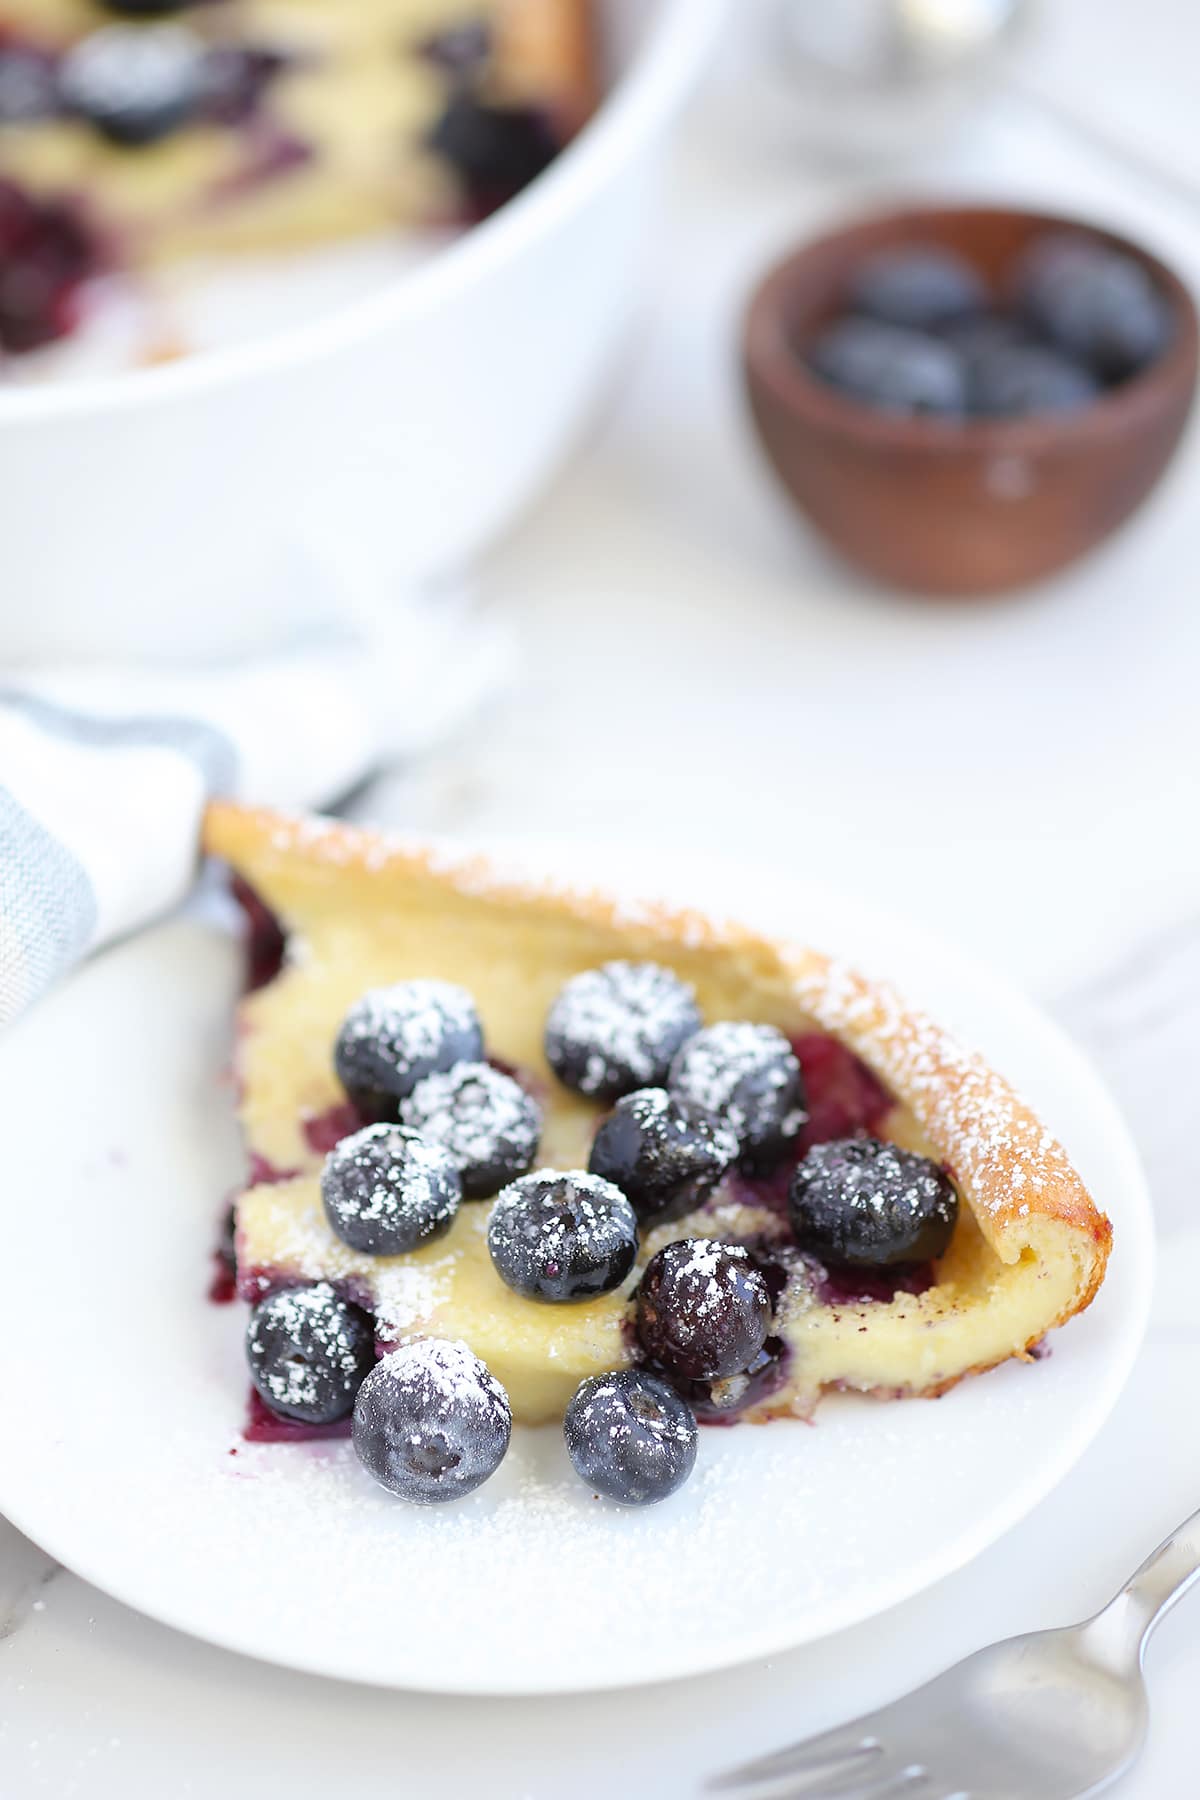 A slice of blueberry dutch baby on a white serving plate dusted with powdered sugar.